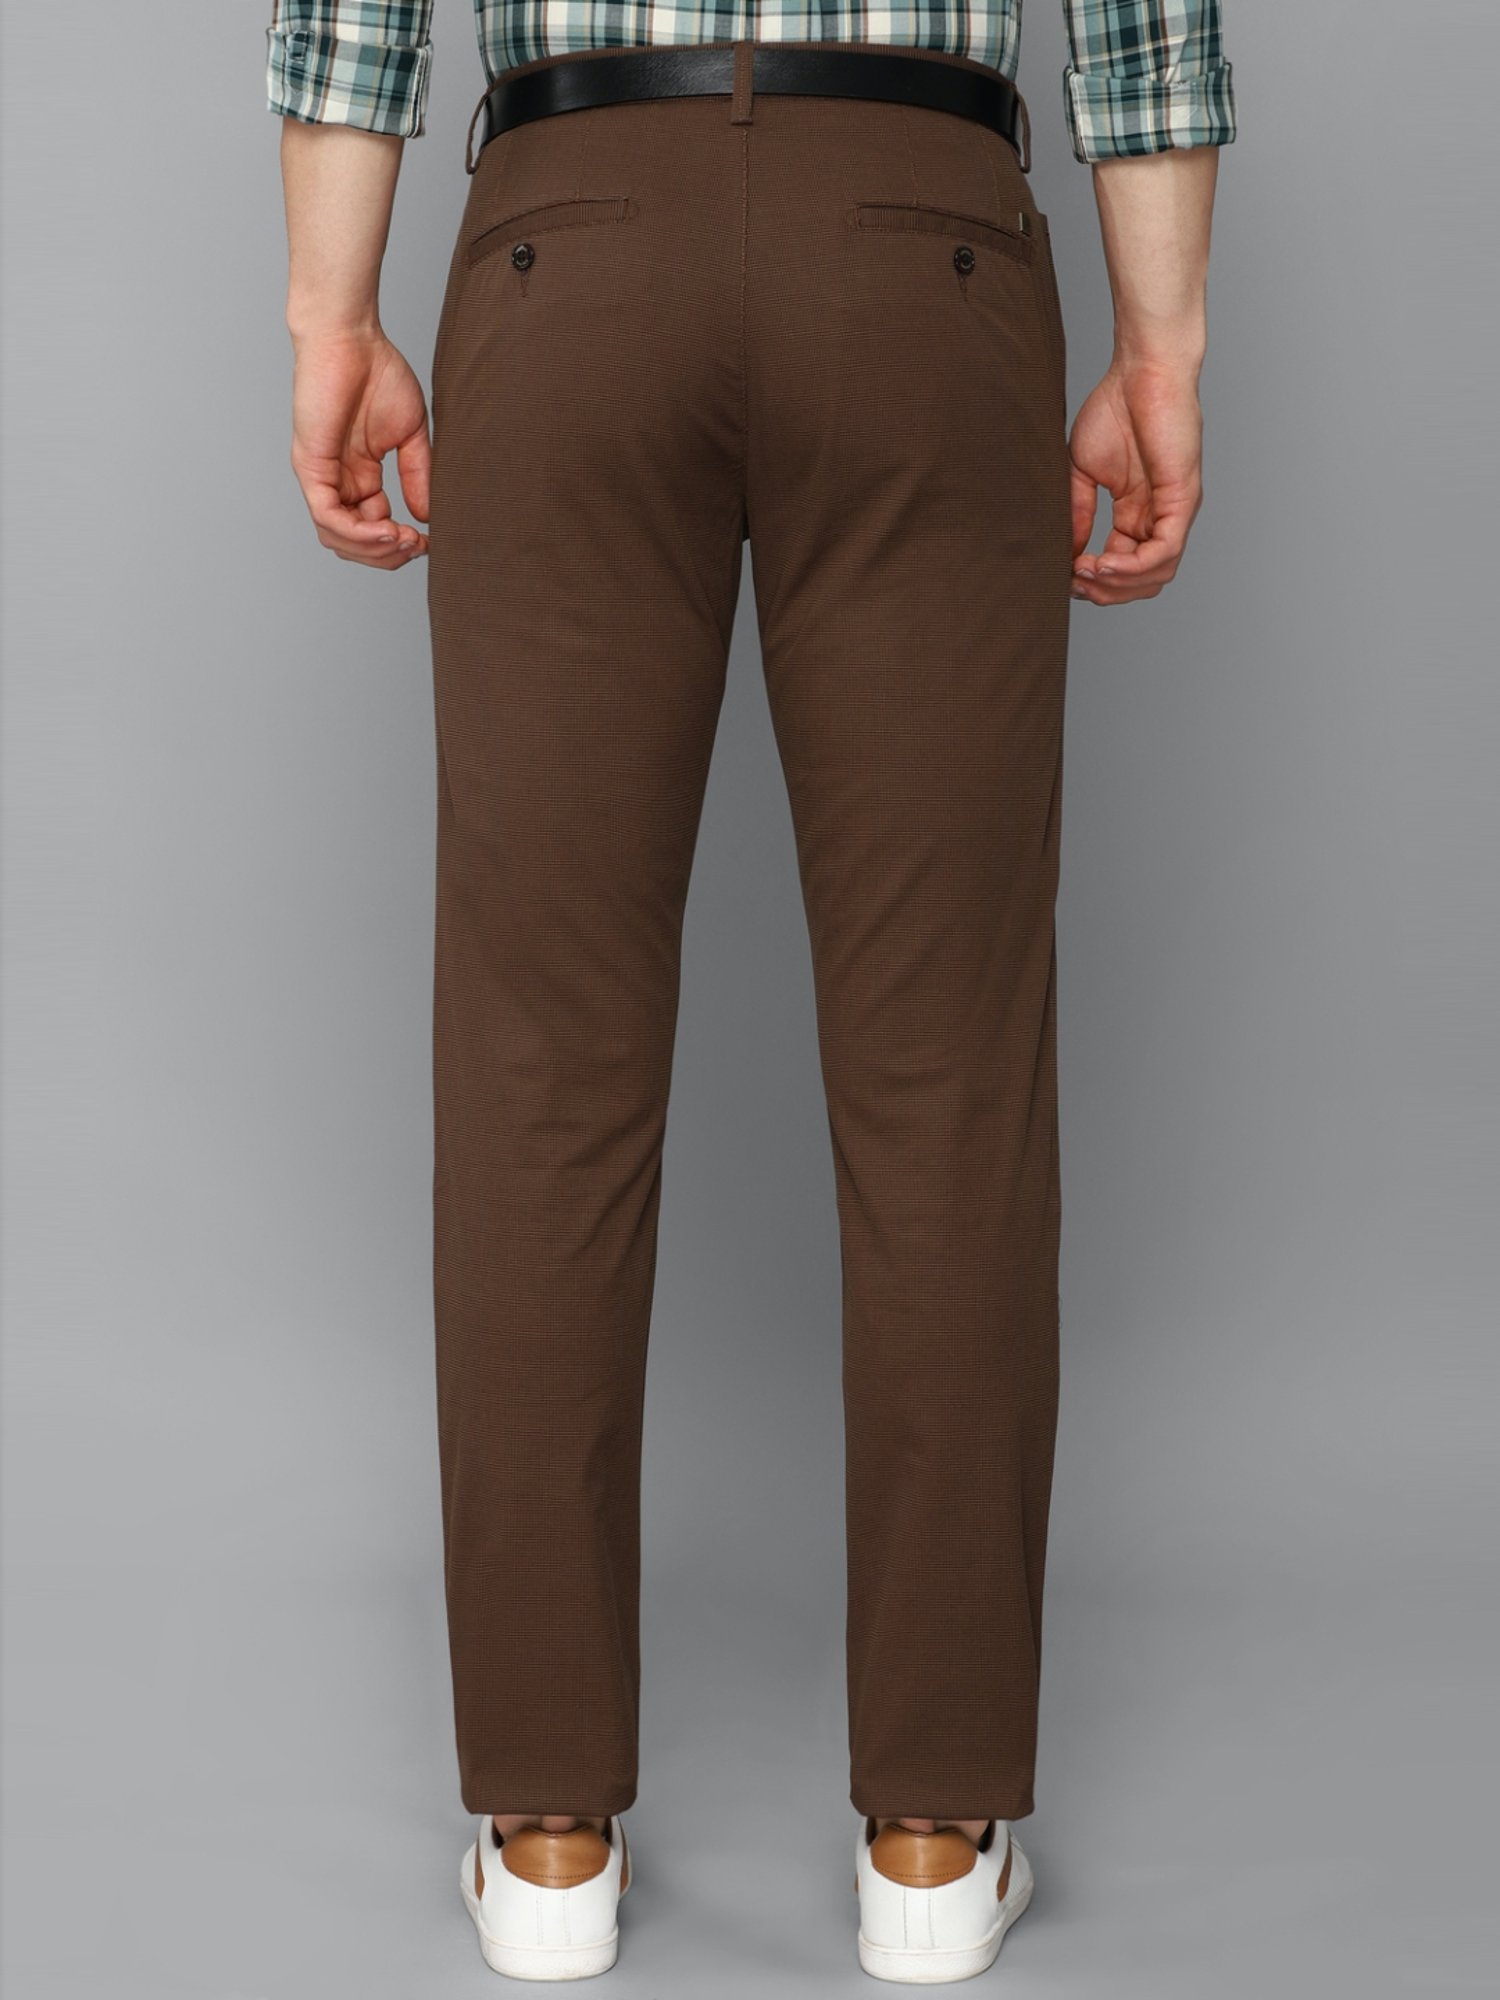 Men Skinny Chinos In Brown Trouser Wholesale Manufacturer & Exporters  Textile & Fashion Leather Clothing Goods with we have provide customization  Brand your own